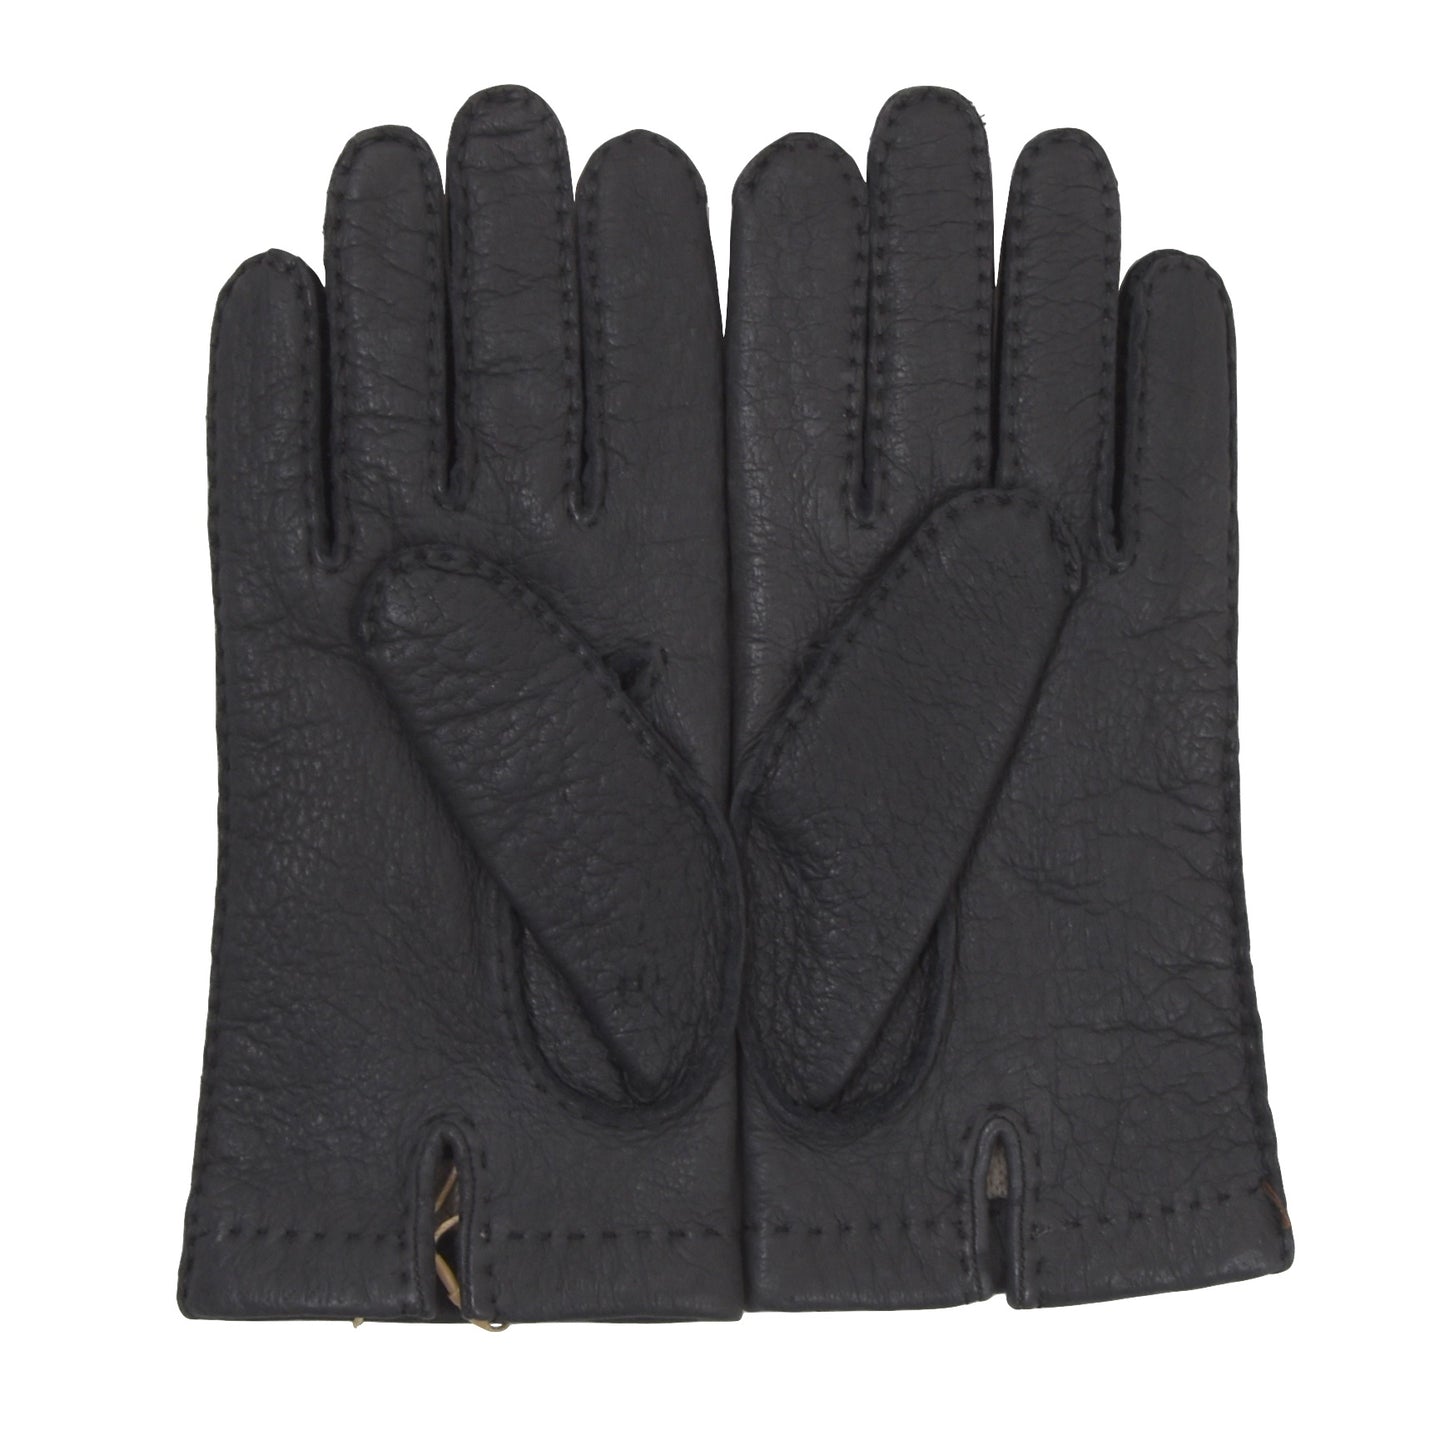 Lined Peccary Leather Gloves Size 8.5 - Charcoal/Dark Grey